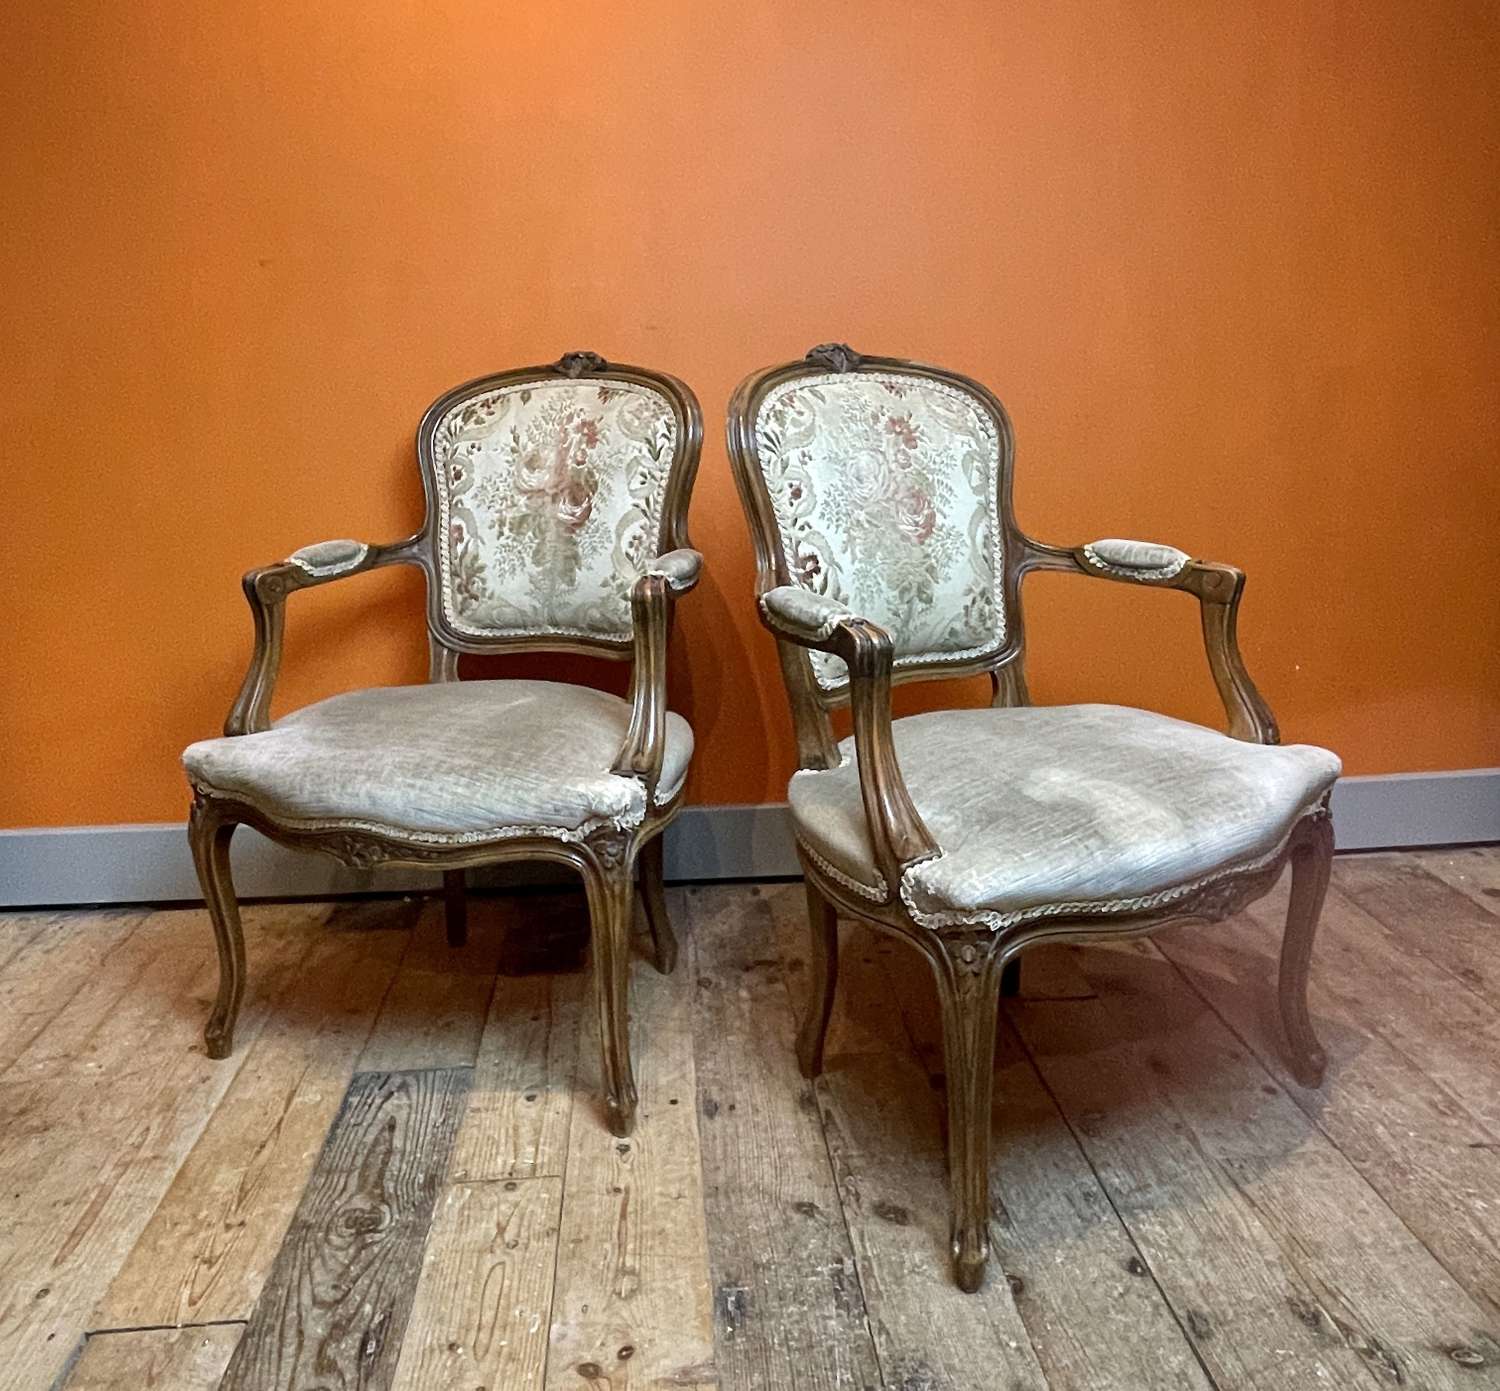 Pair of Vintage French Louis XV Revival Fauteuils